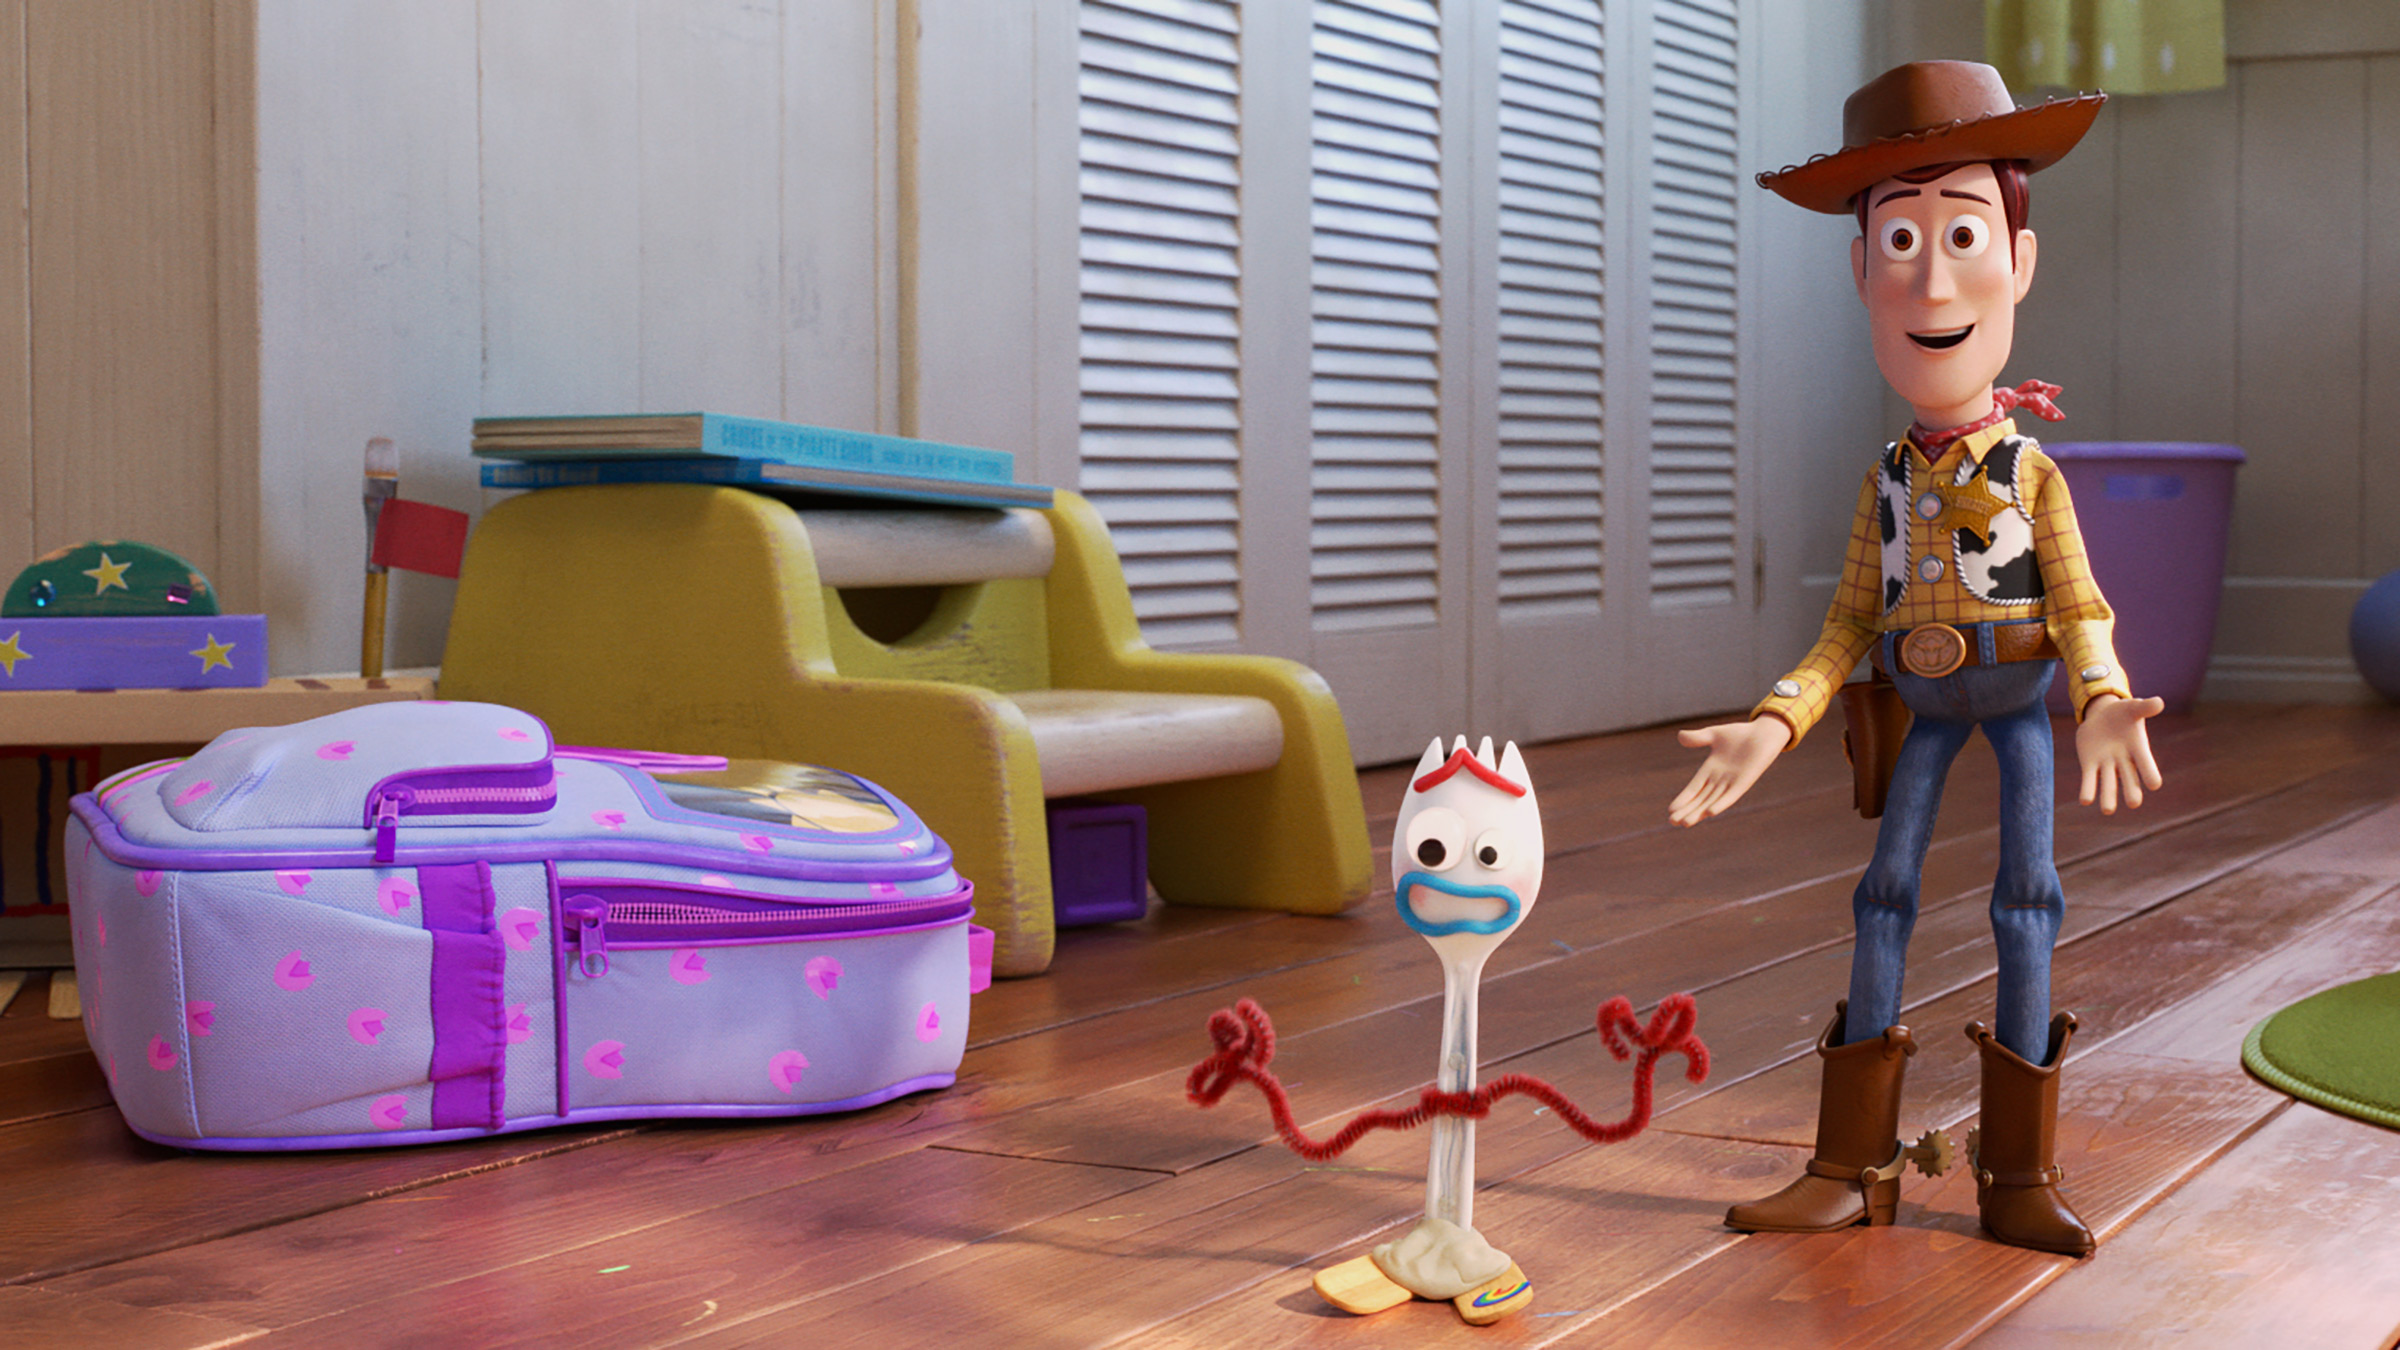 In 'Toy Story 4,' Woody (Tom Hanks) has got a friend—or something—in Forky (Tony Hale). (Disney/Pixar)